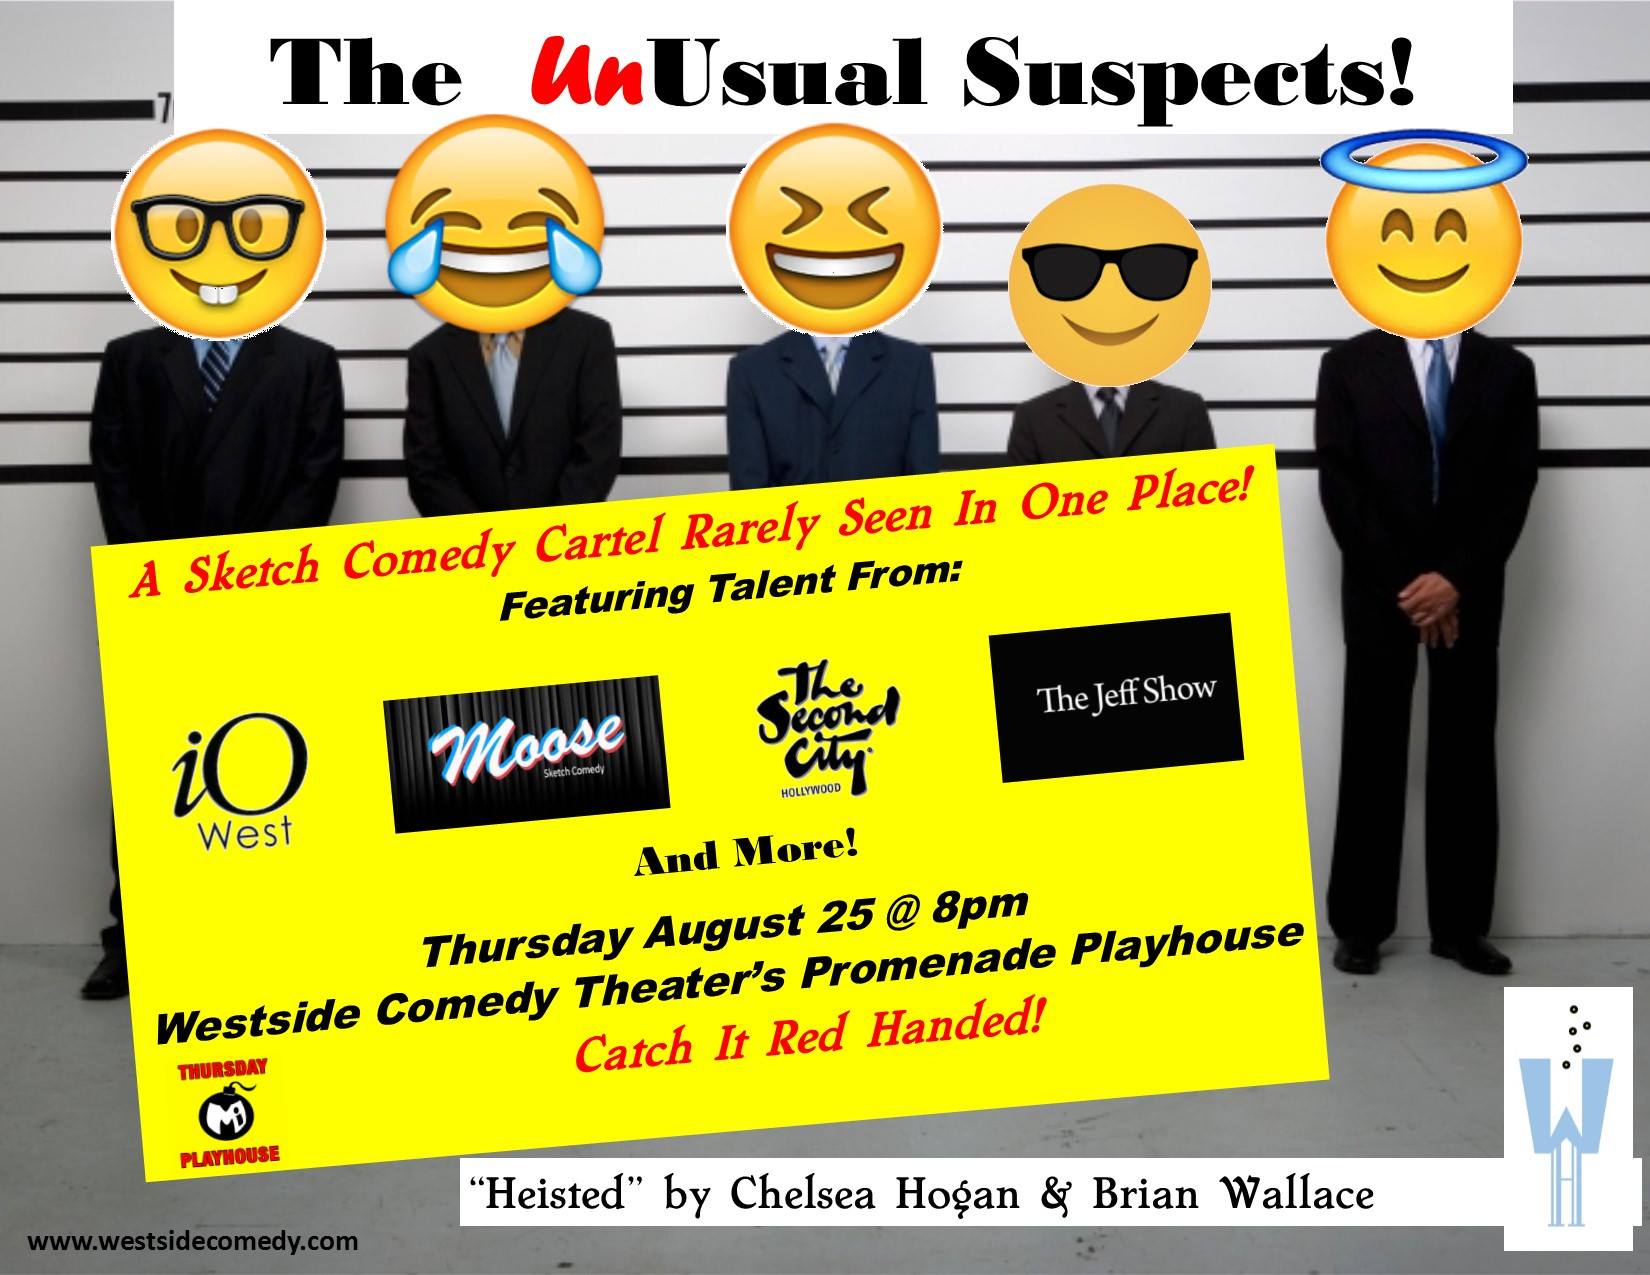 The UNusual Suspects! The Sketch Comedy Cartel